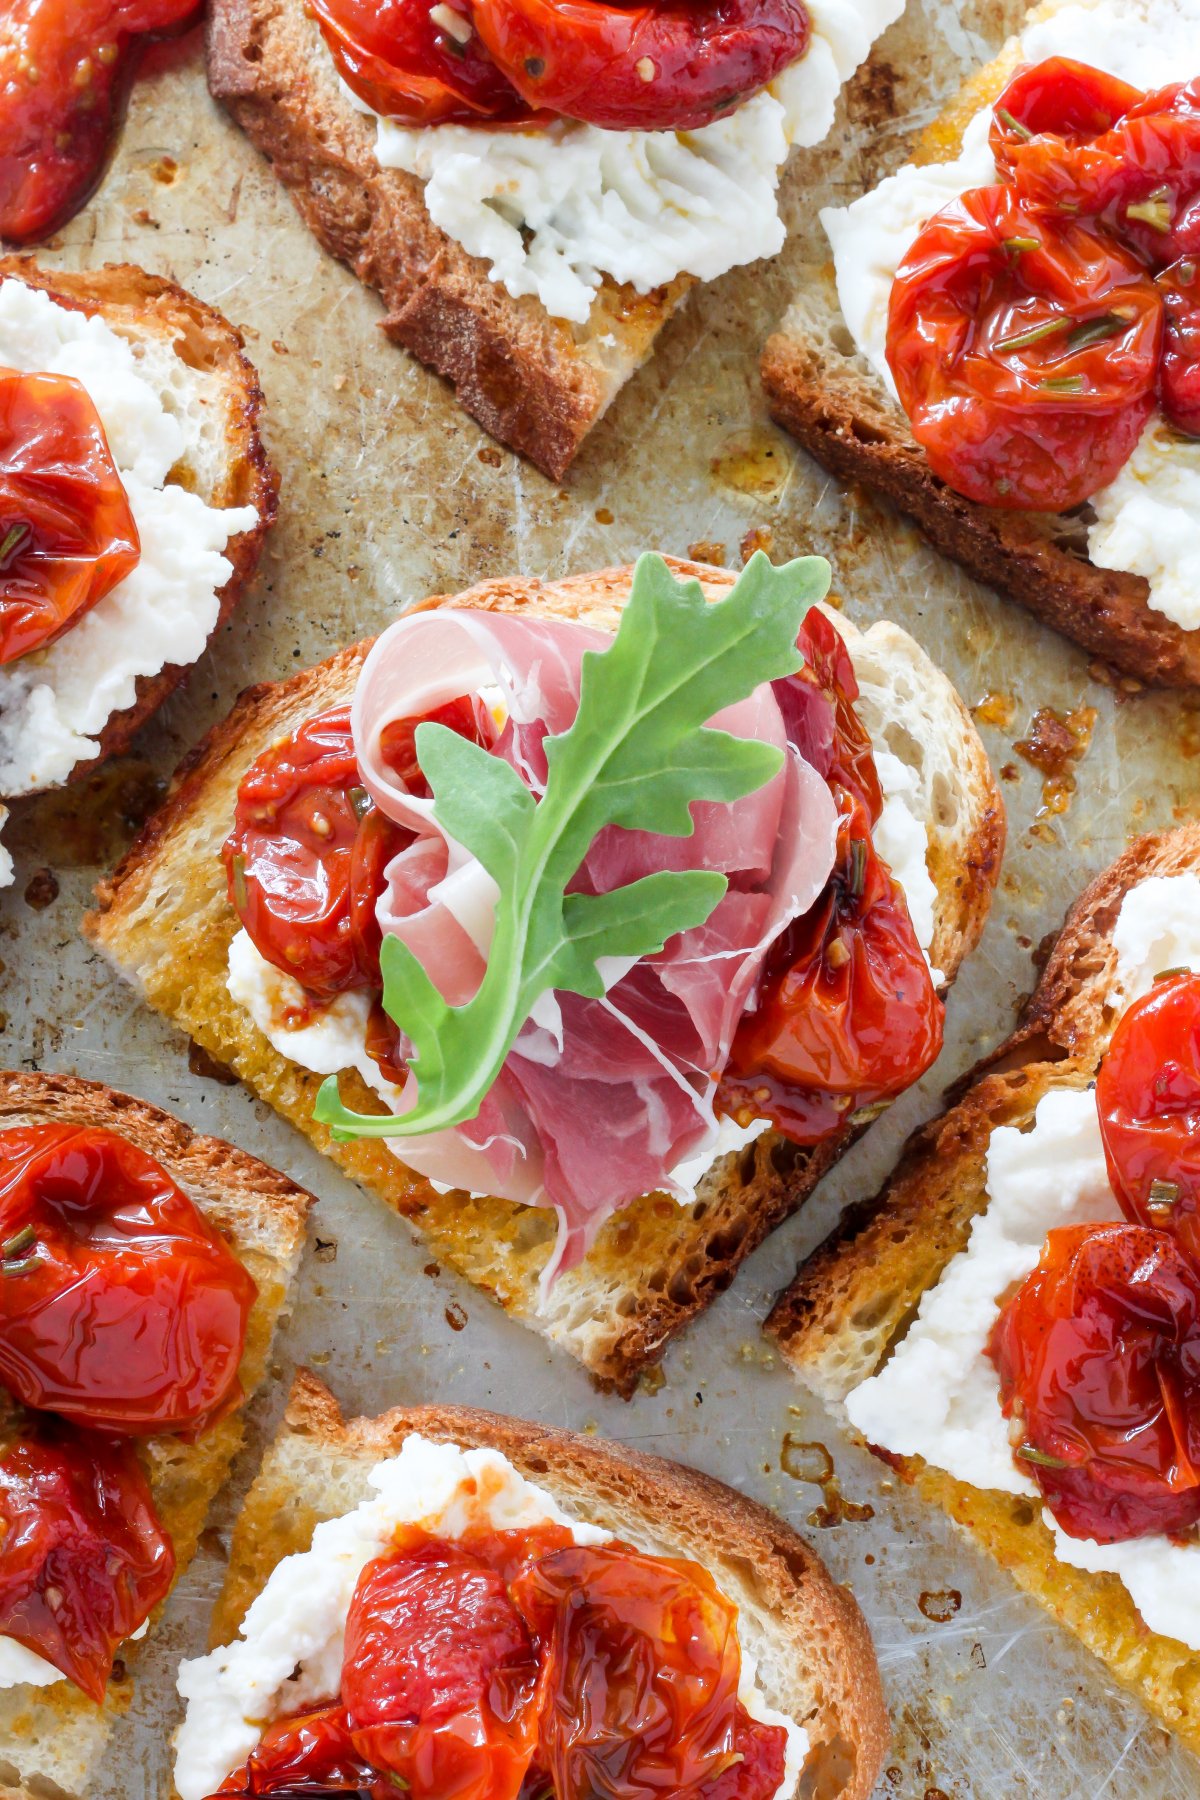 Bruschetta with Rosemary, Roasted Tomatoes, Ricotta, and Prosciutto